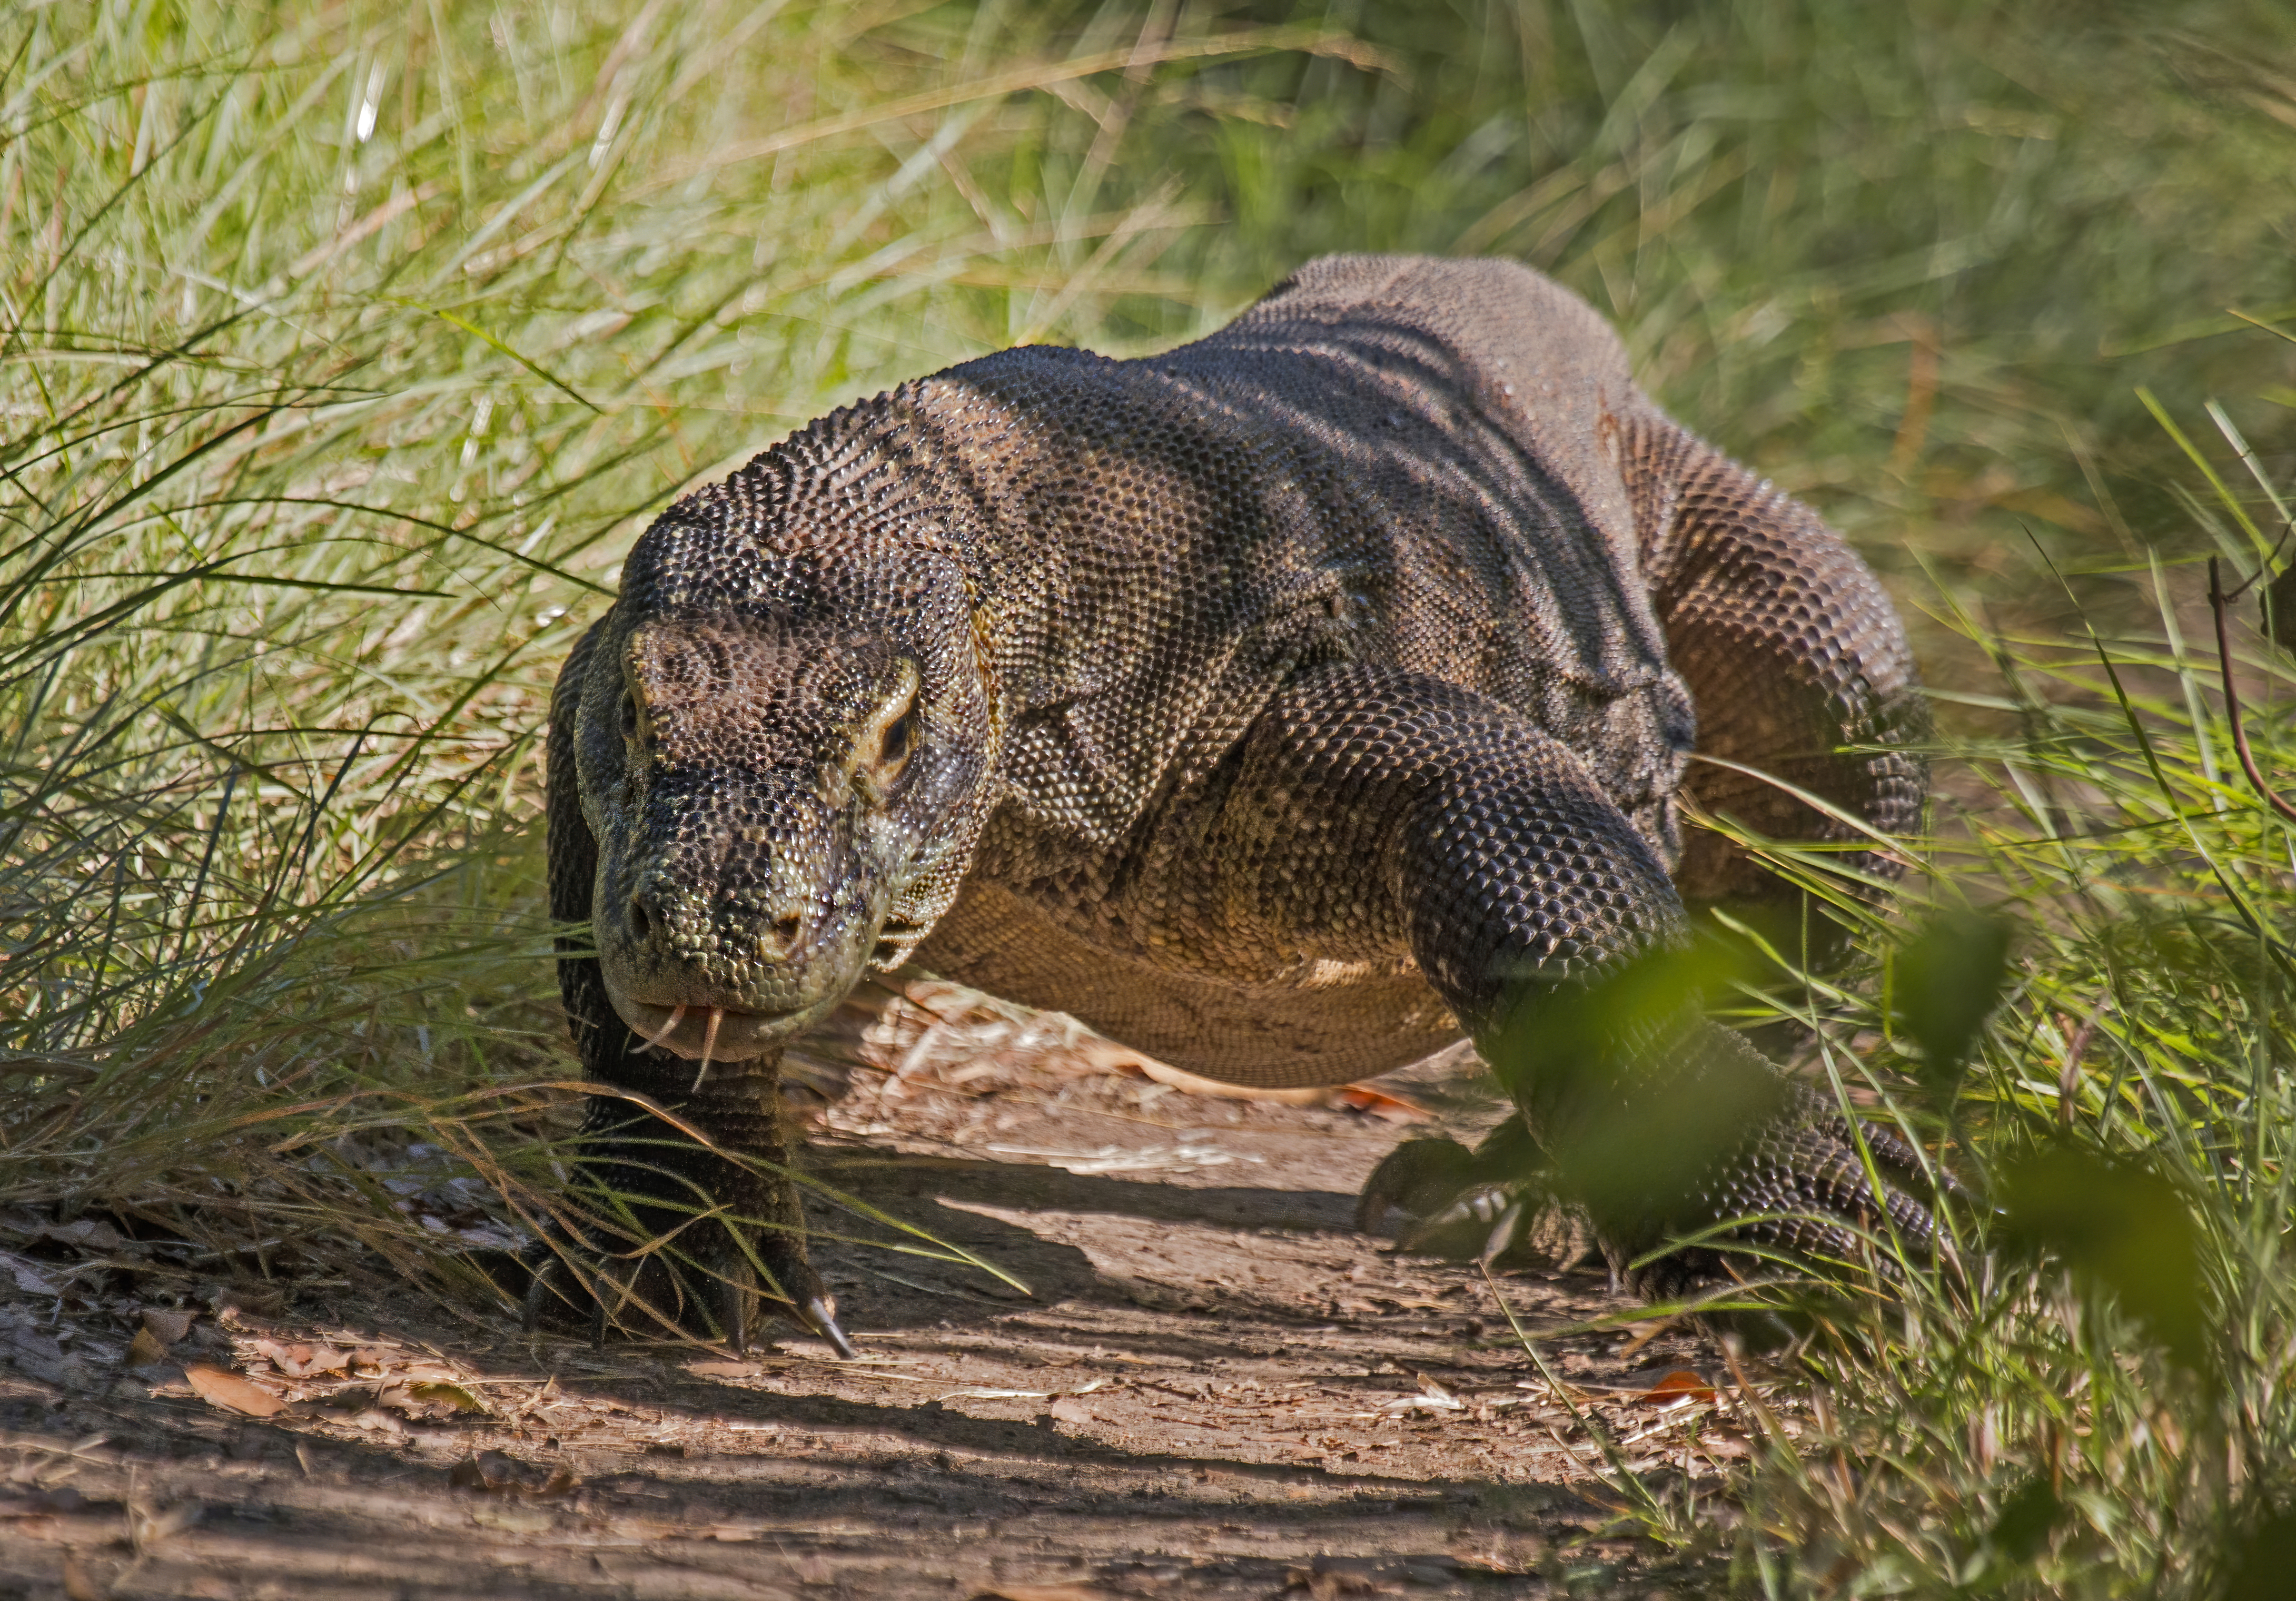 What country has the most Komodo dragons?